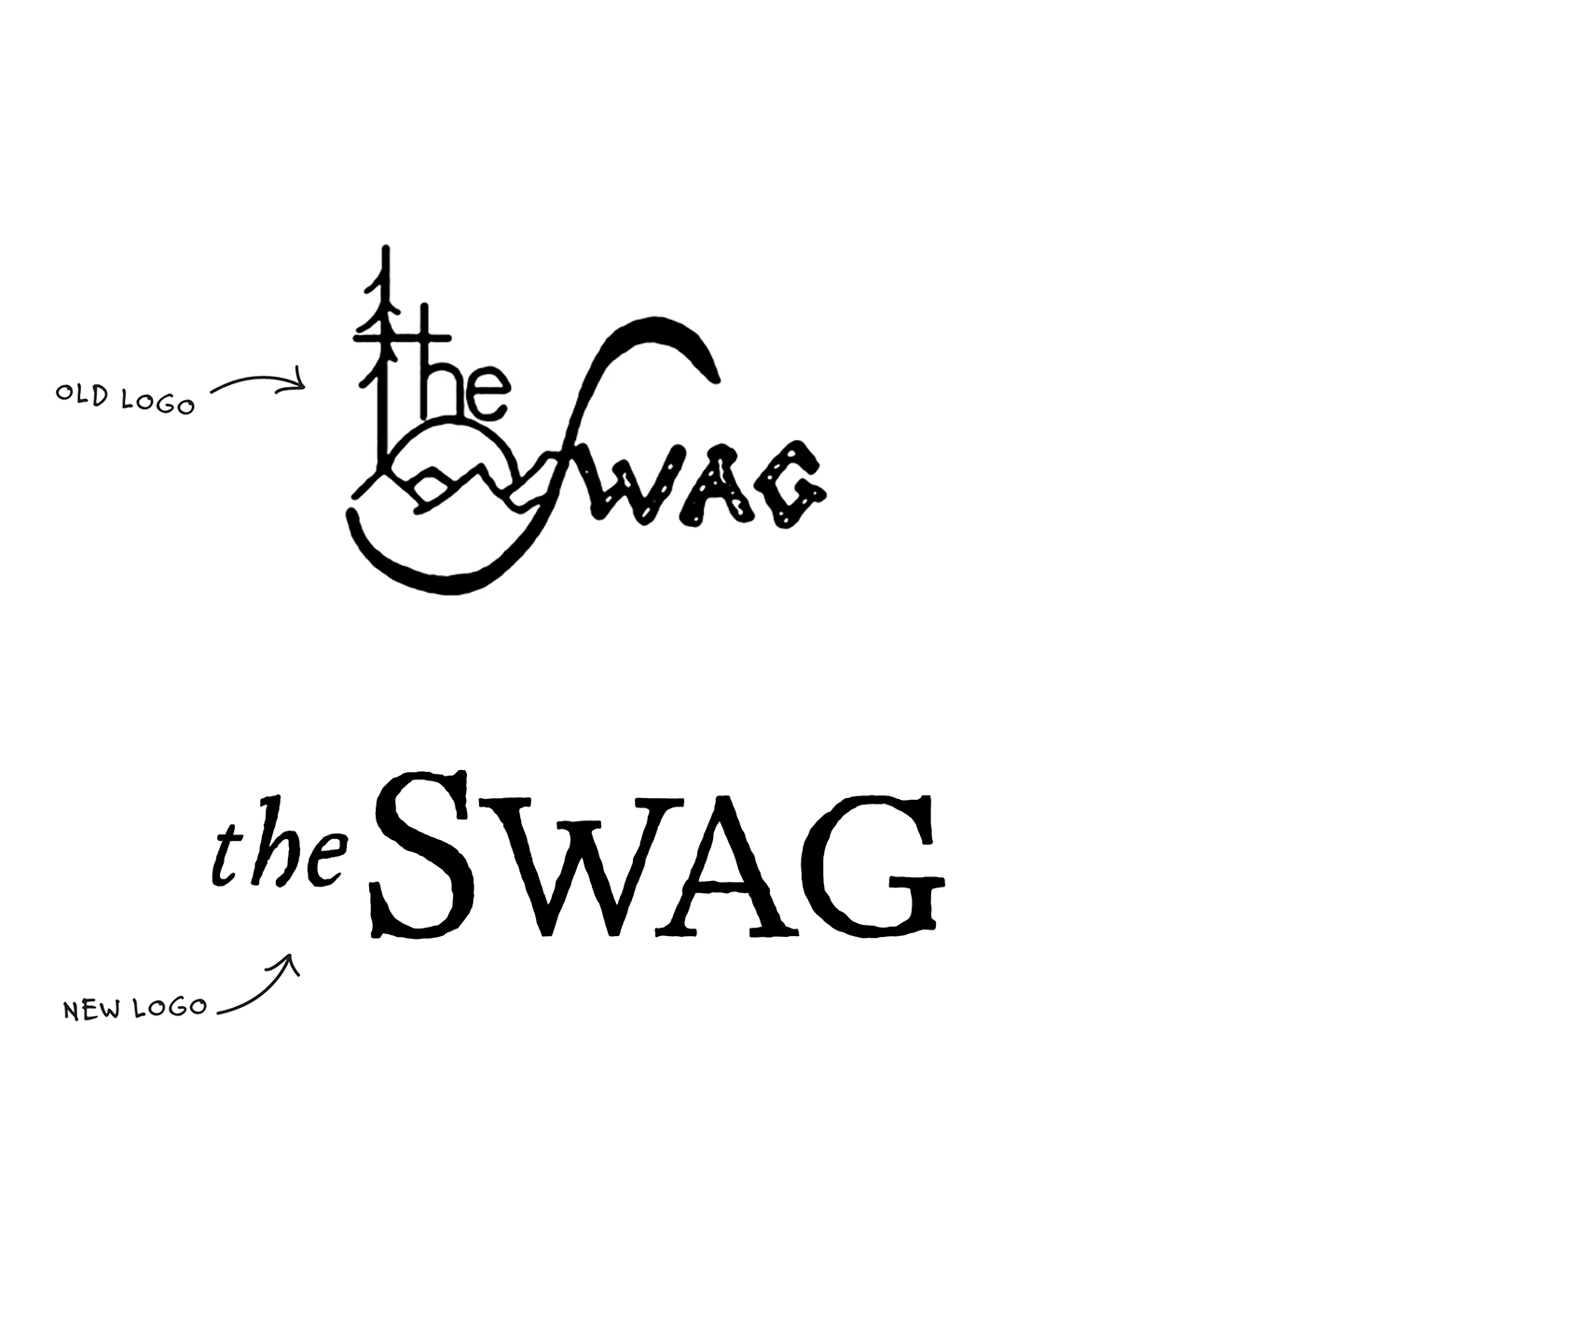 The Swag logo redesign